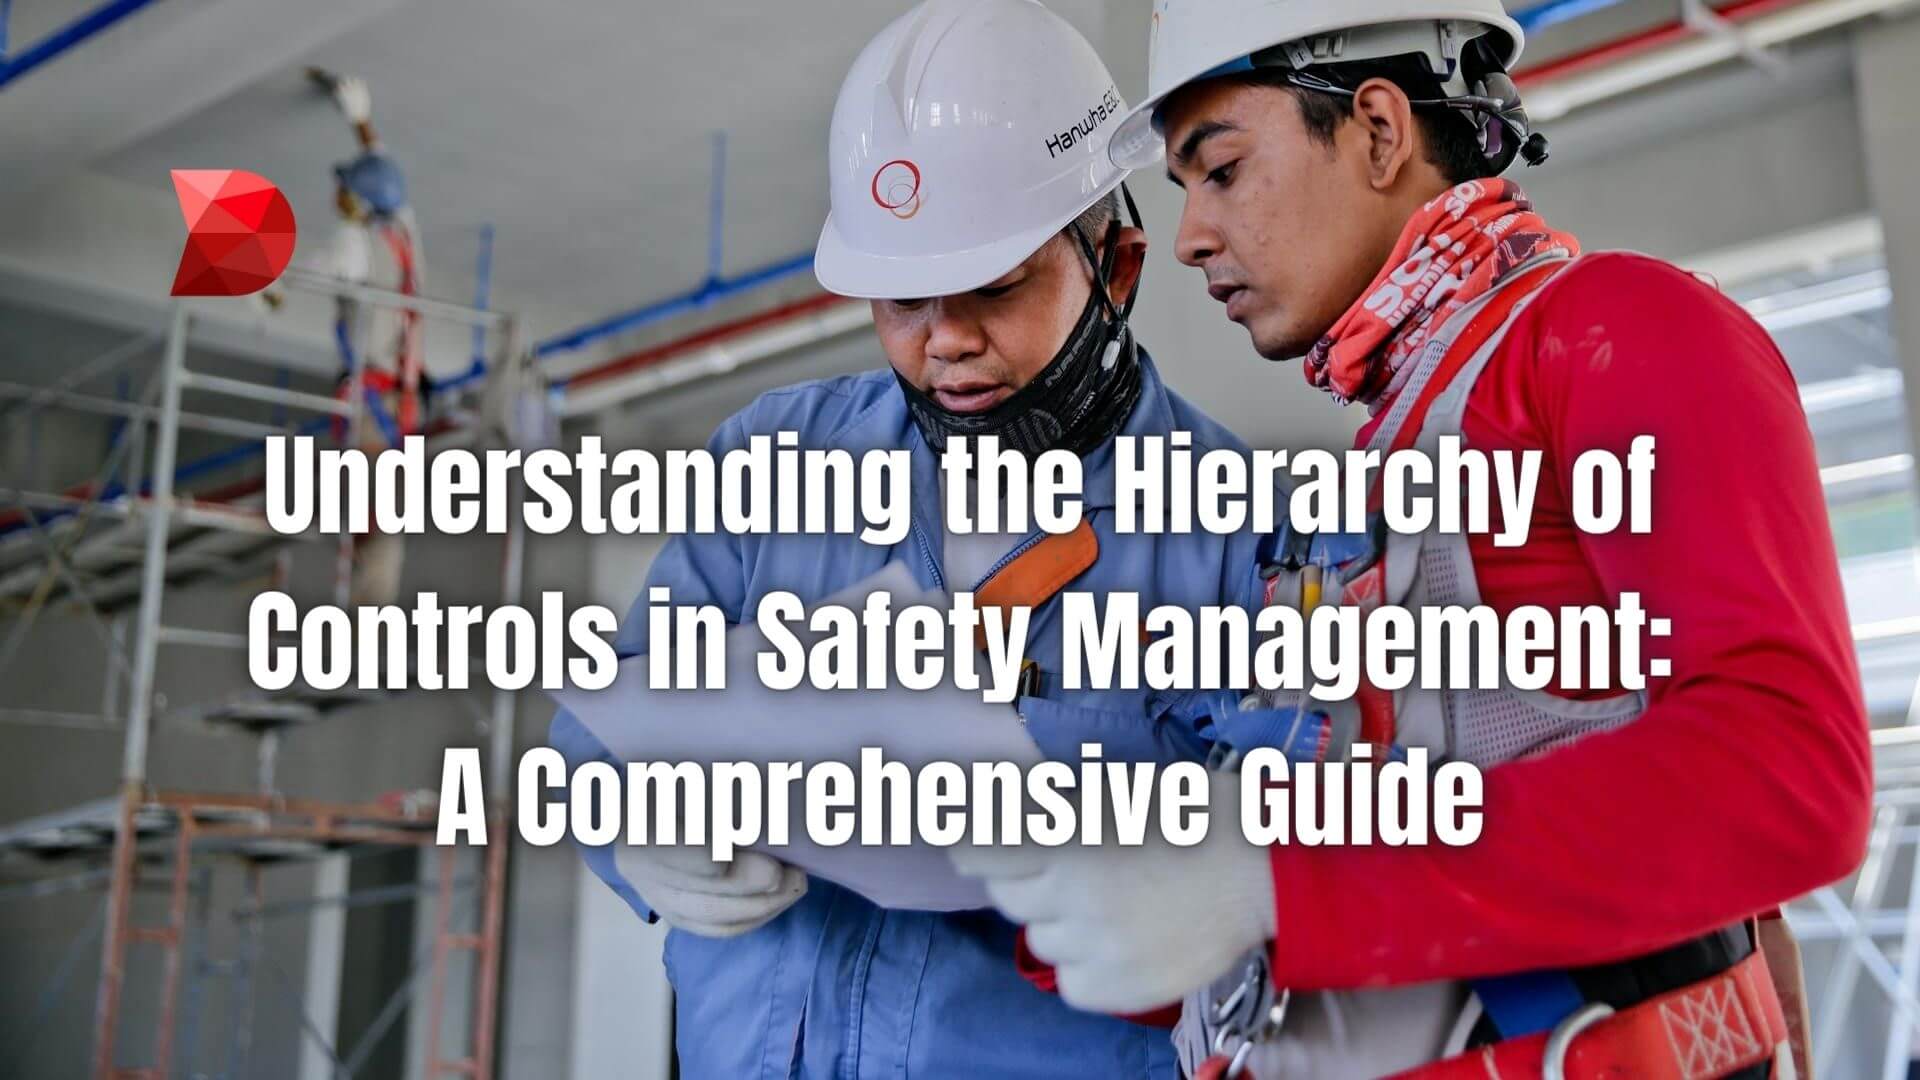 Unlock the secrets of safety management with our guide to the Hierarchy of Controls. Learn how to prioritize and implement safety measures effectively.